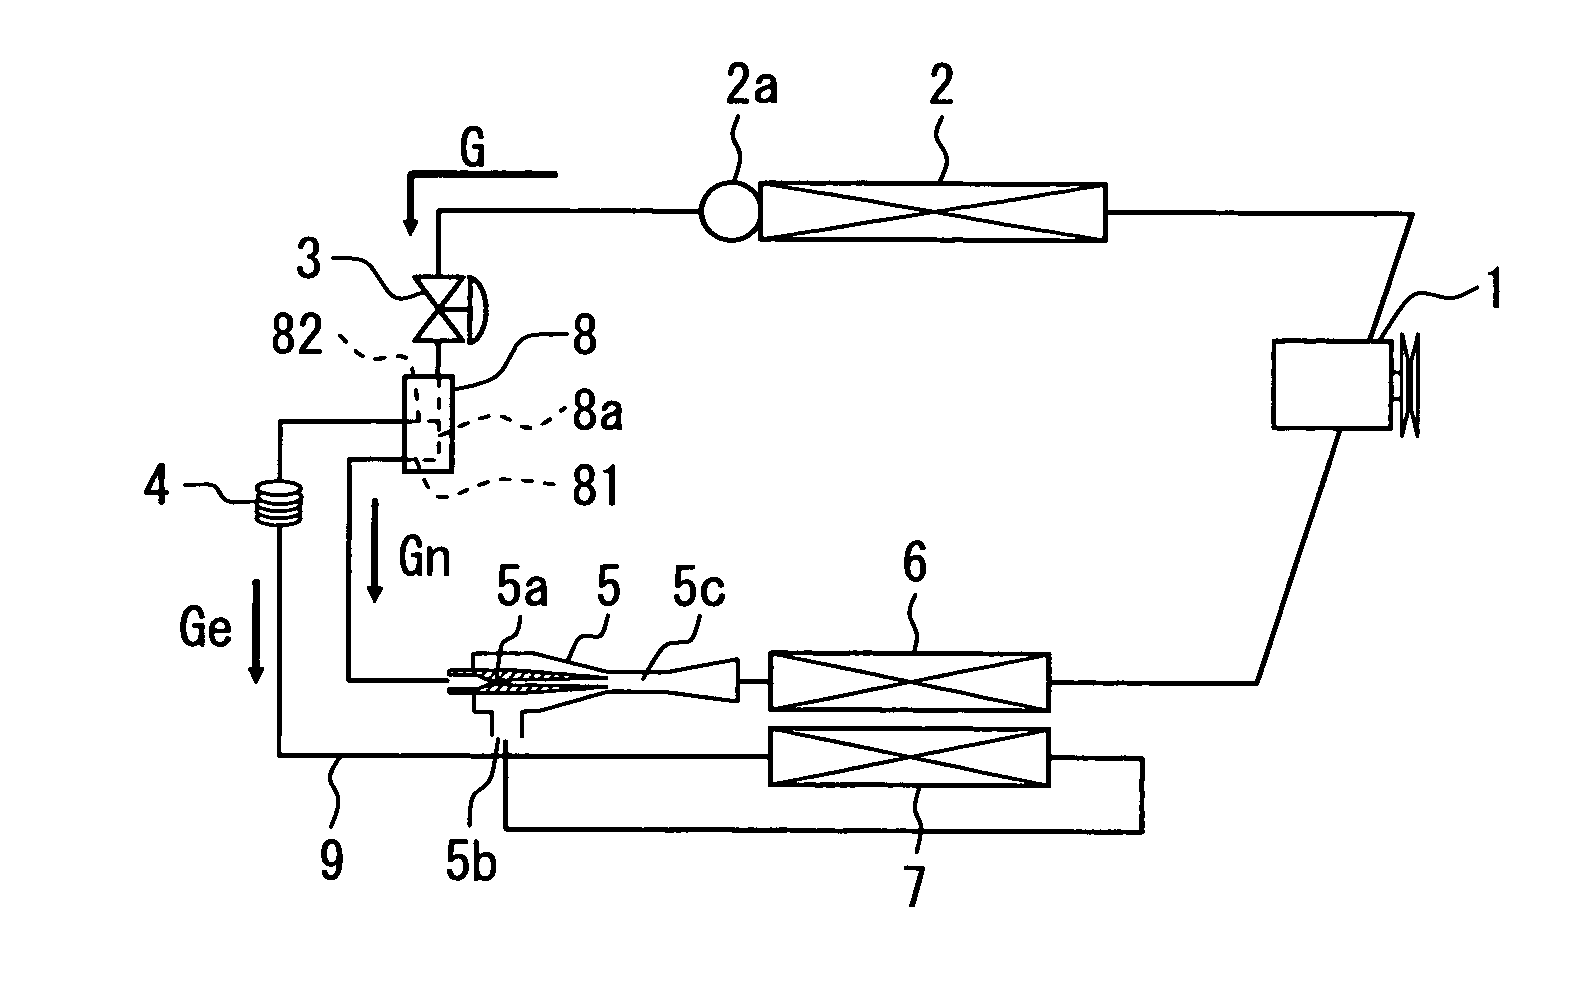 Vapor compression refrigerating cycle apparatus with an ejector and distributor